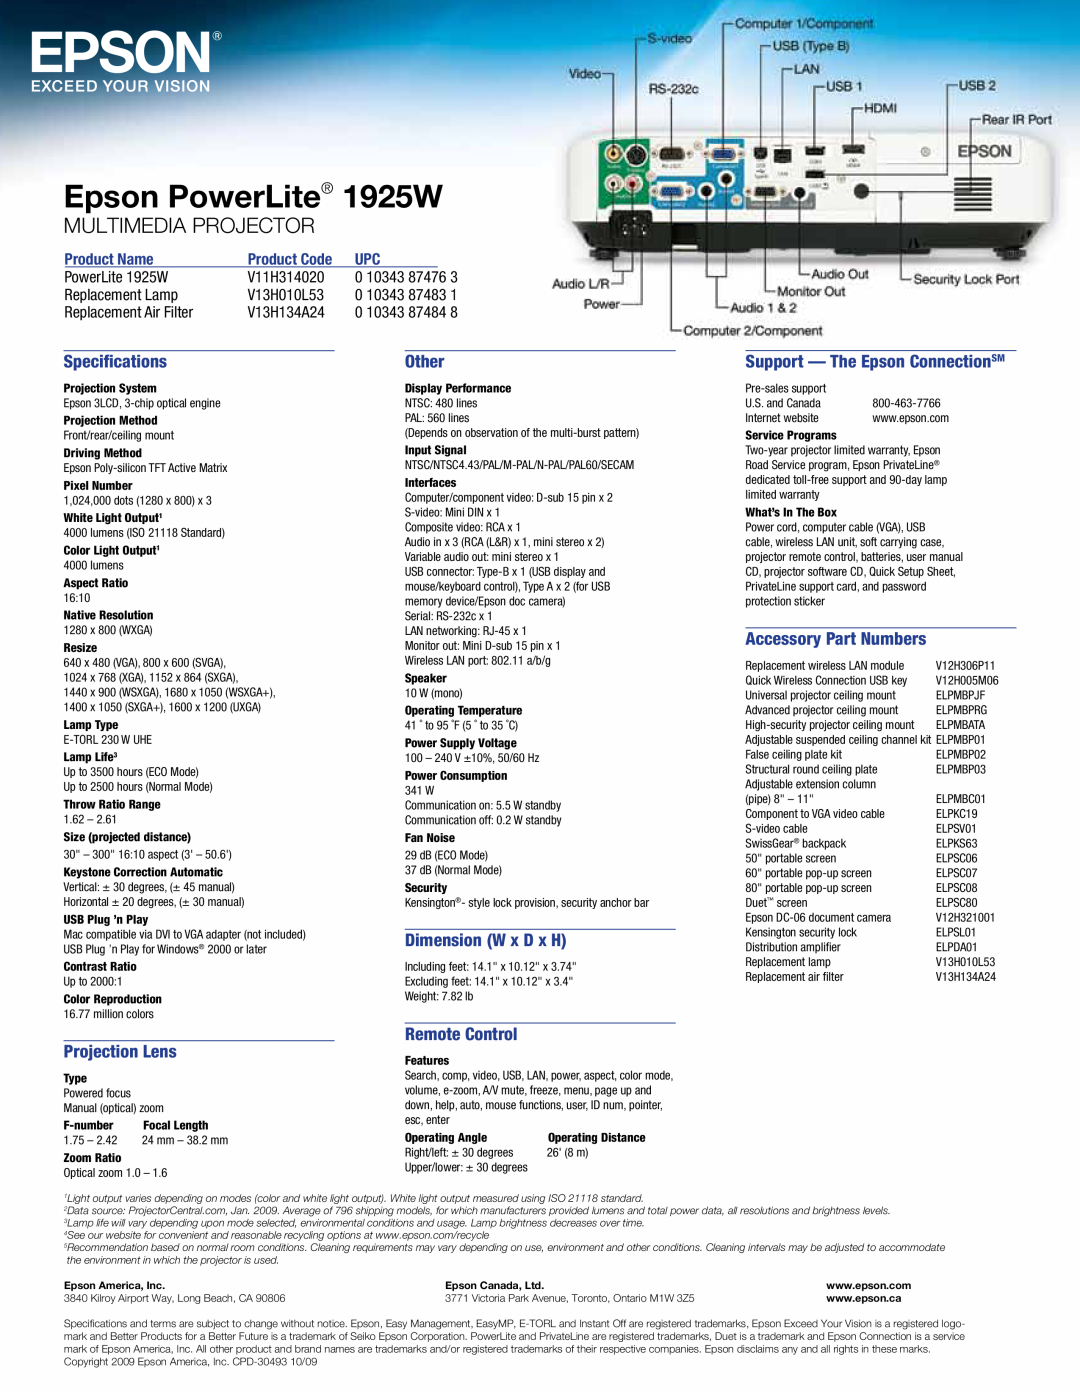 Epson specifications Epson PowerLite 1925W, Multimedia Projector, Specifications, Other, Dimension W x D x H 